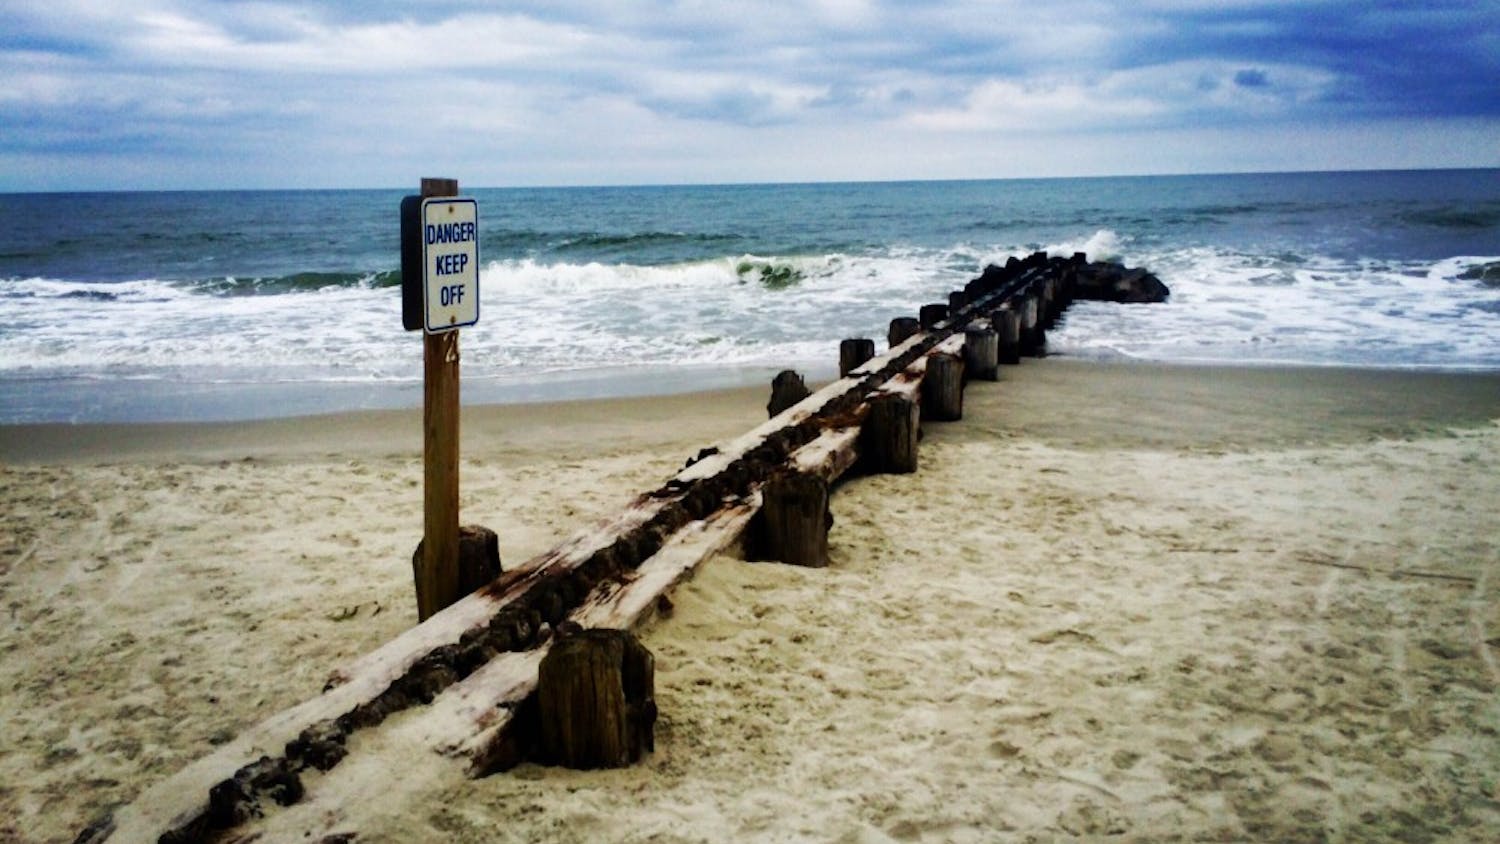 Pawleys Island is home to beautiful quiet beaches, peaceful gardens and great local seafood joints.